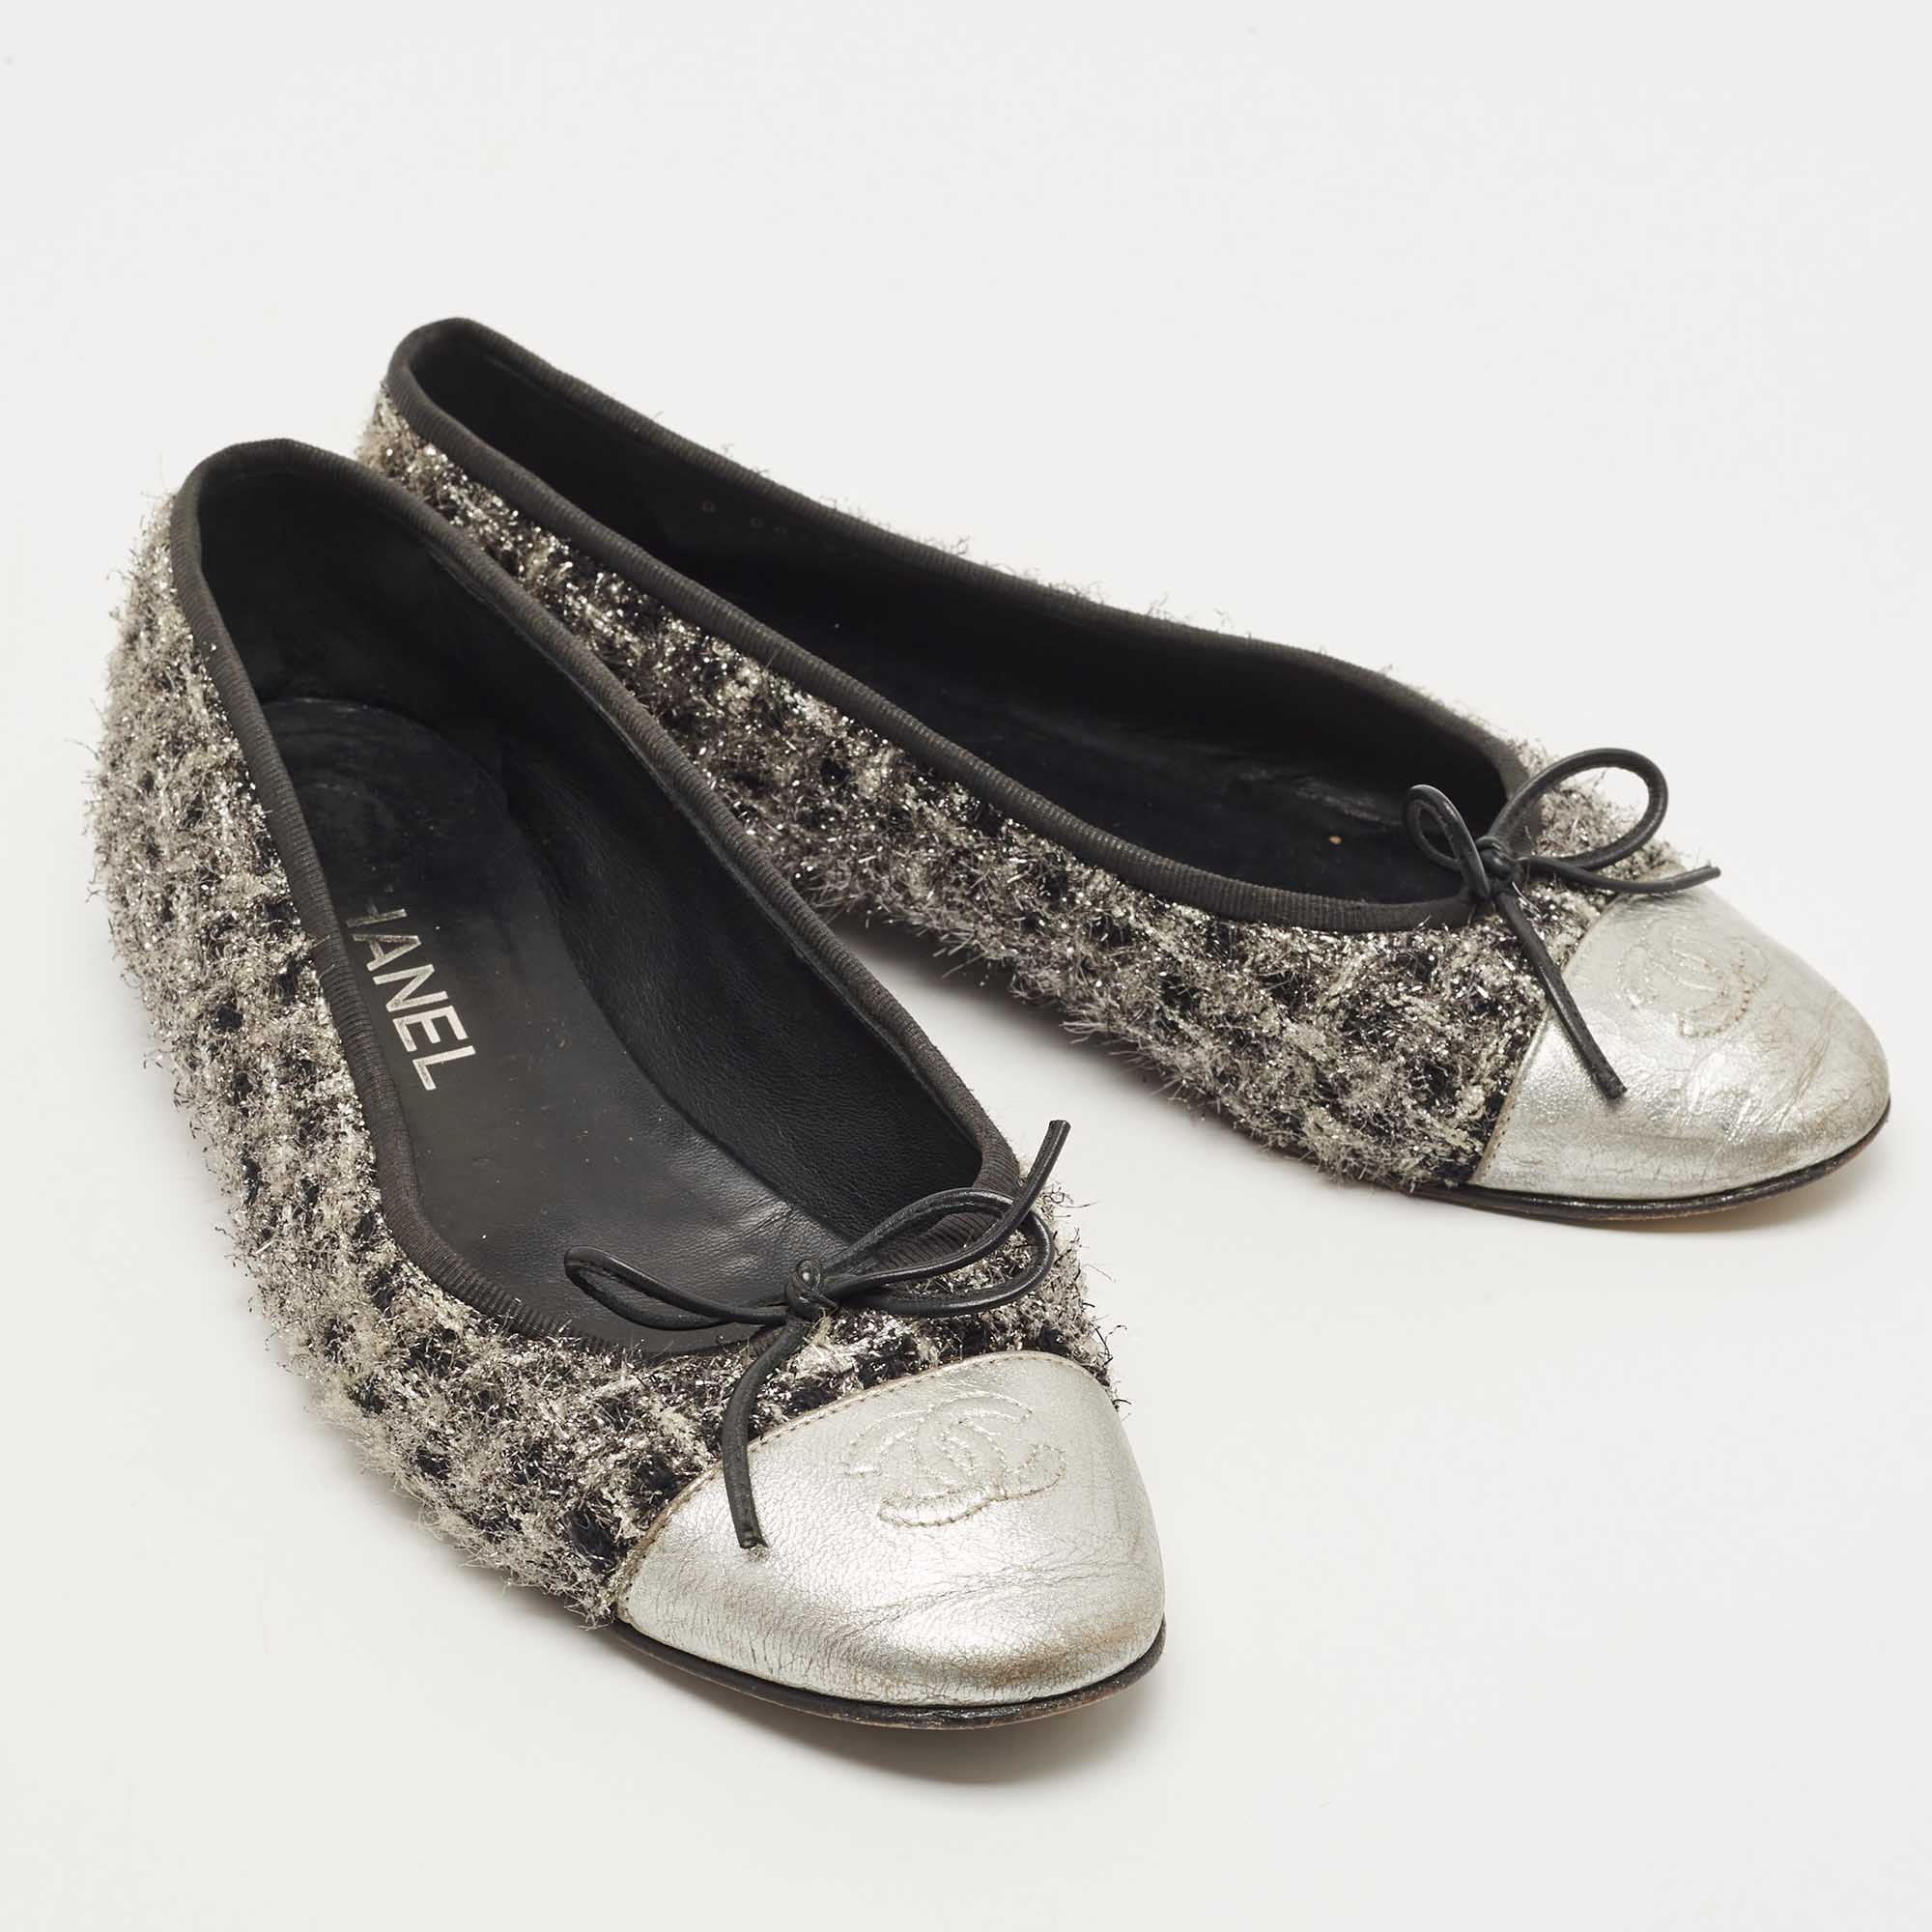 Chanel Two Tone Tweed and Leather CC Cap Toe Bow Ballet Flats Size 39 Chanel